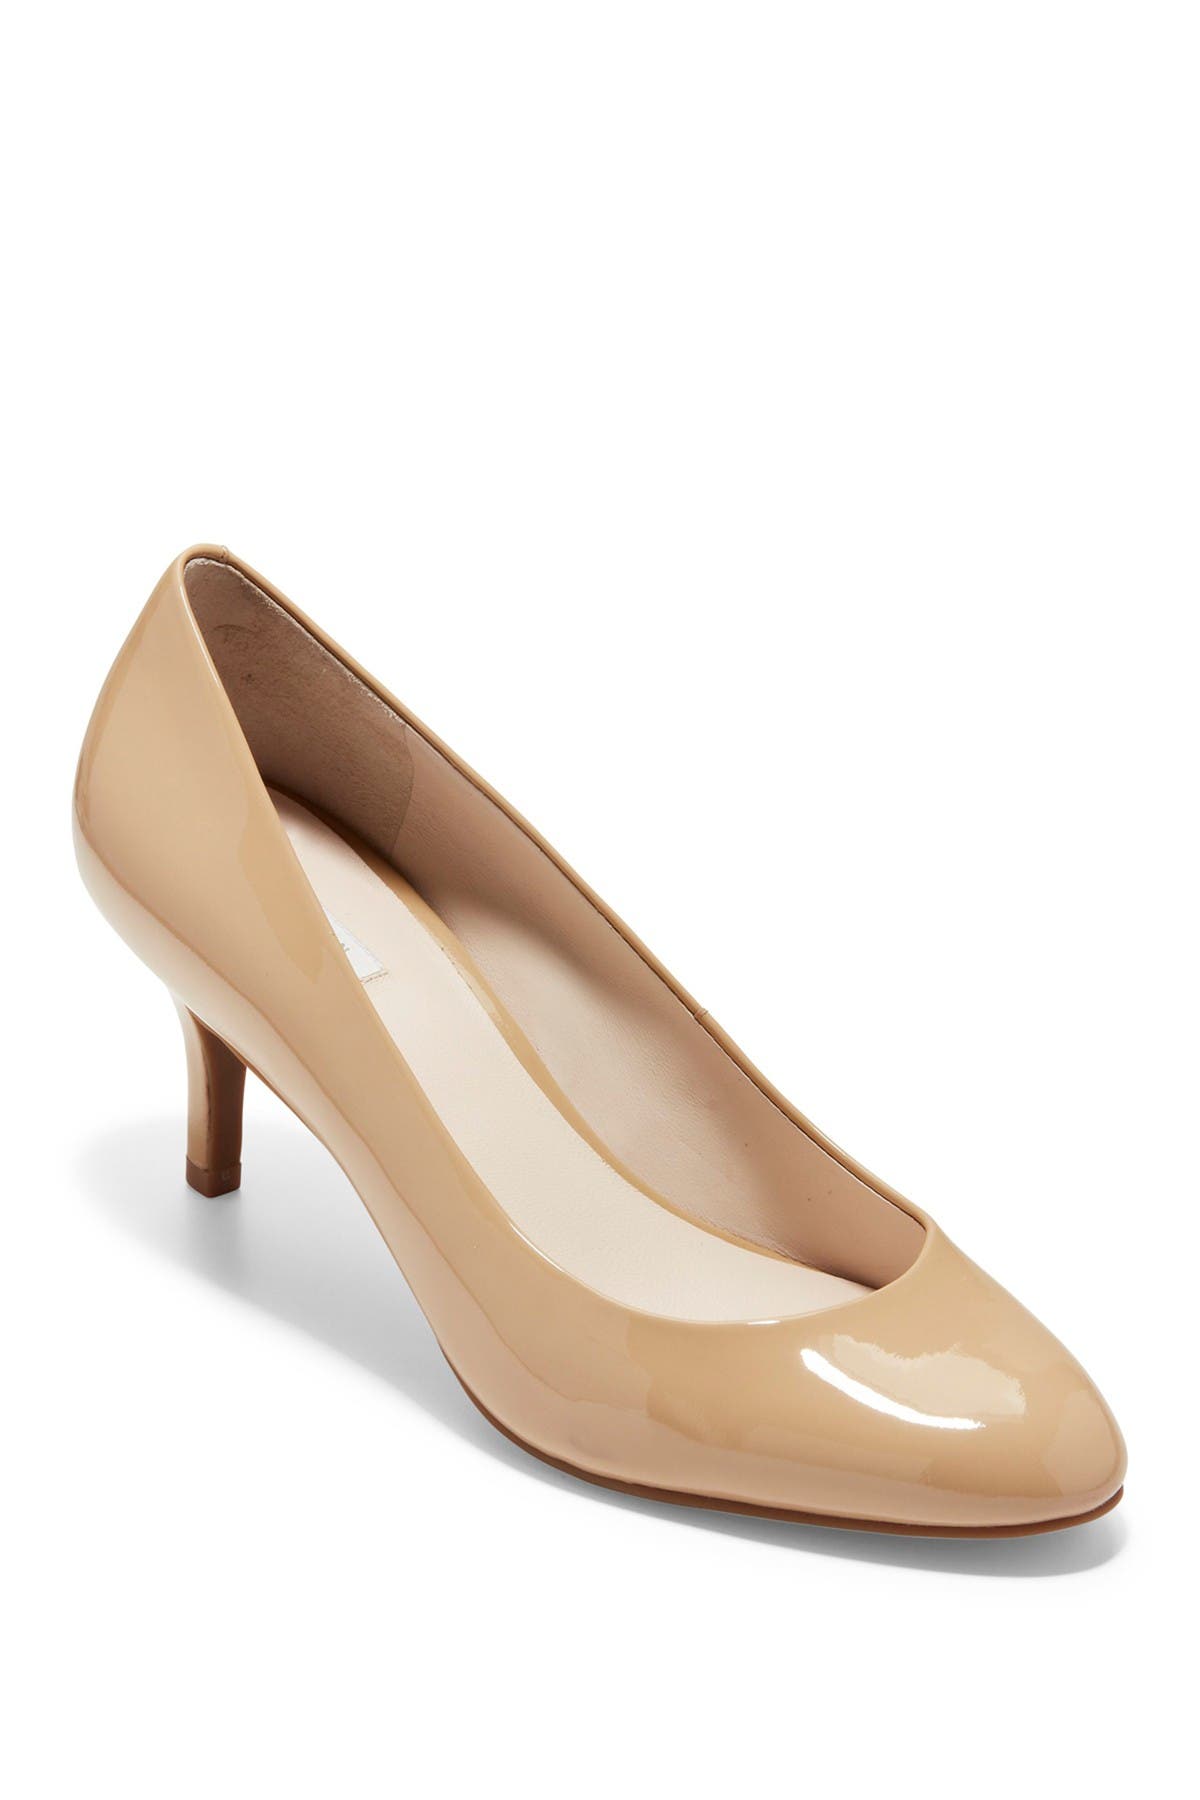 Cole Haan | Ava Leather Pump 